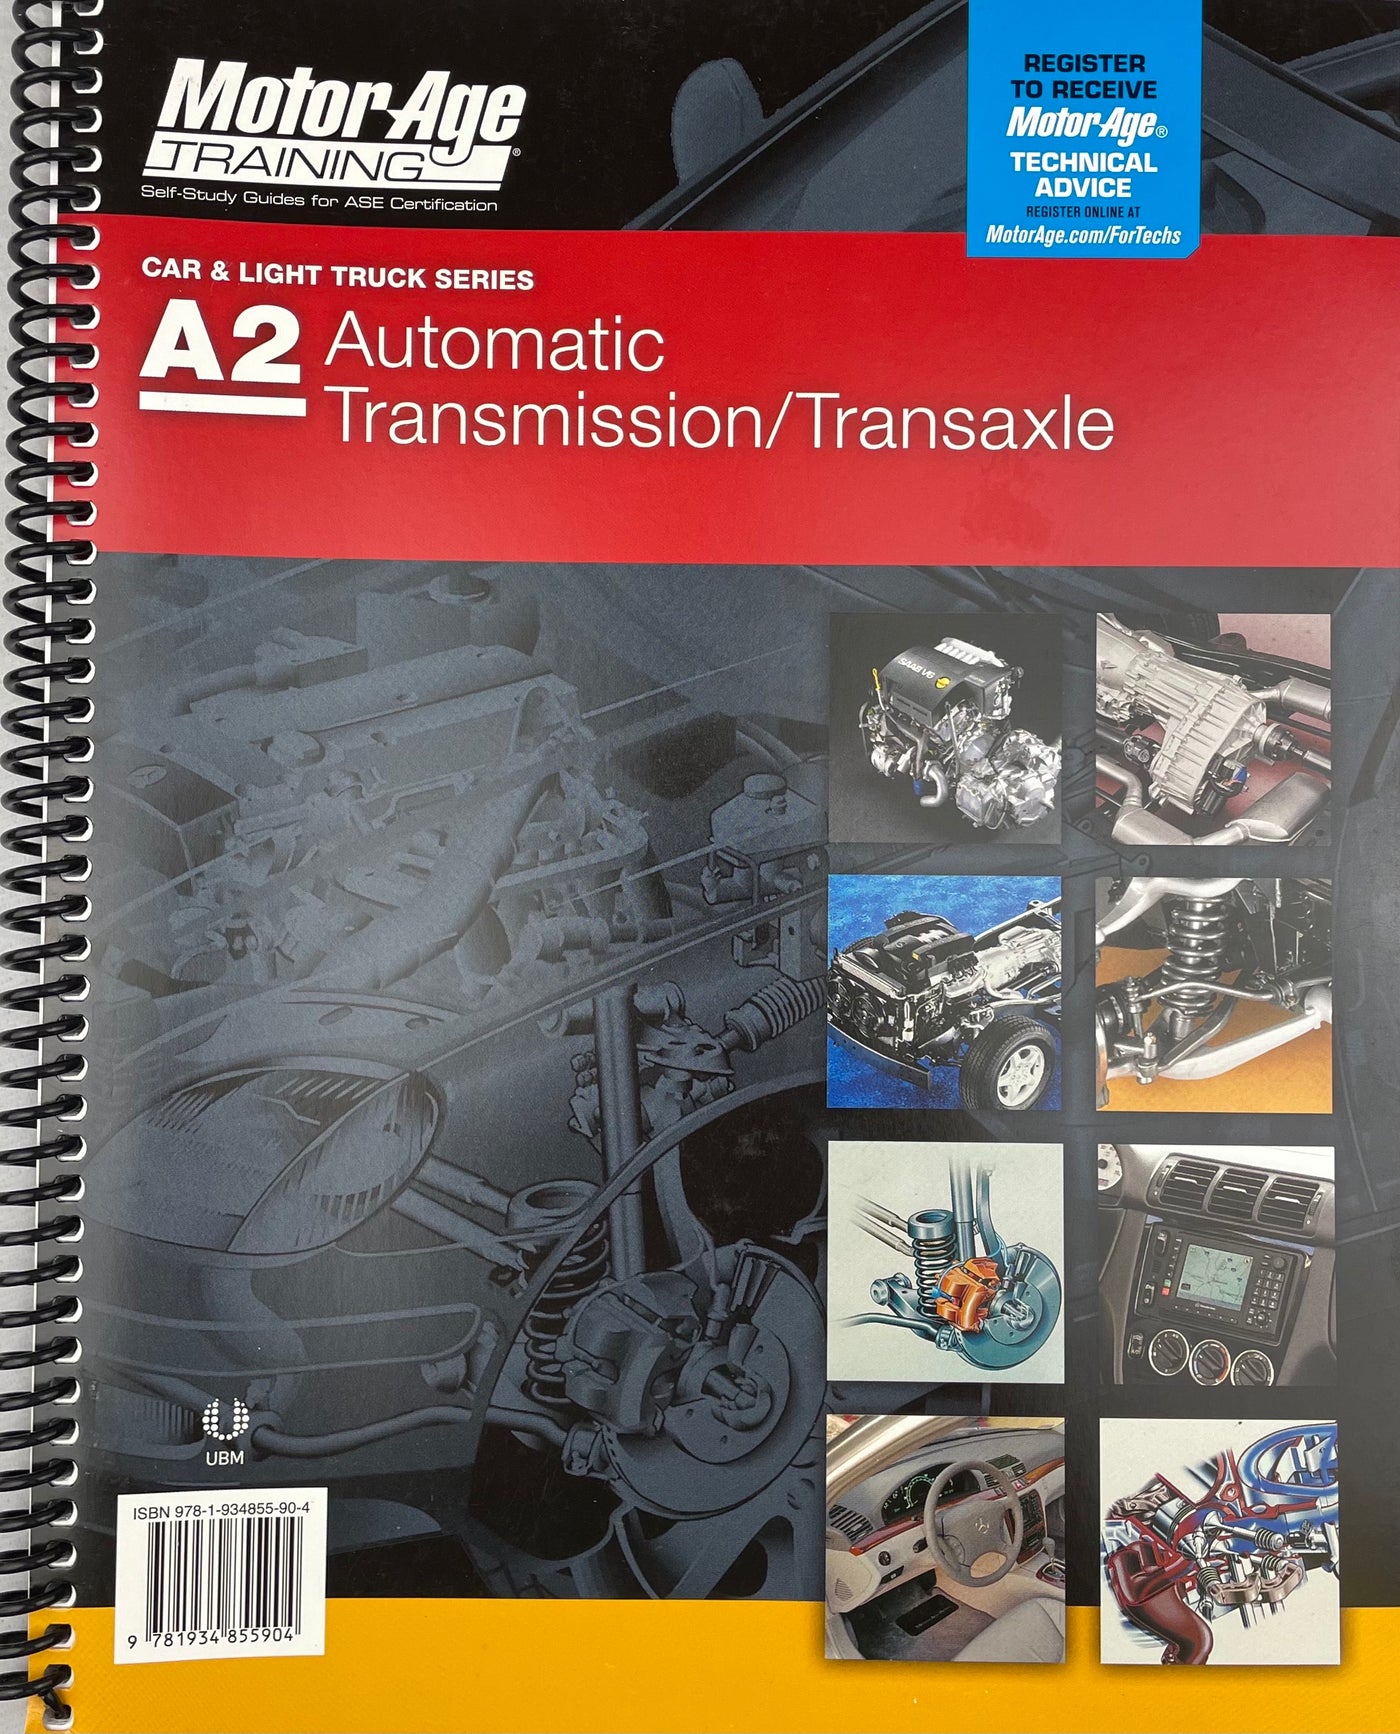 ASE Test Preparation - A2 Automatic Transmission / Transaxle (Motor Age Training)